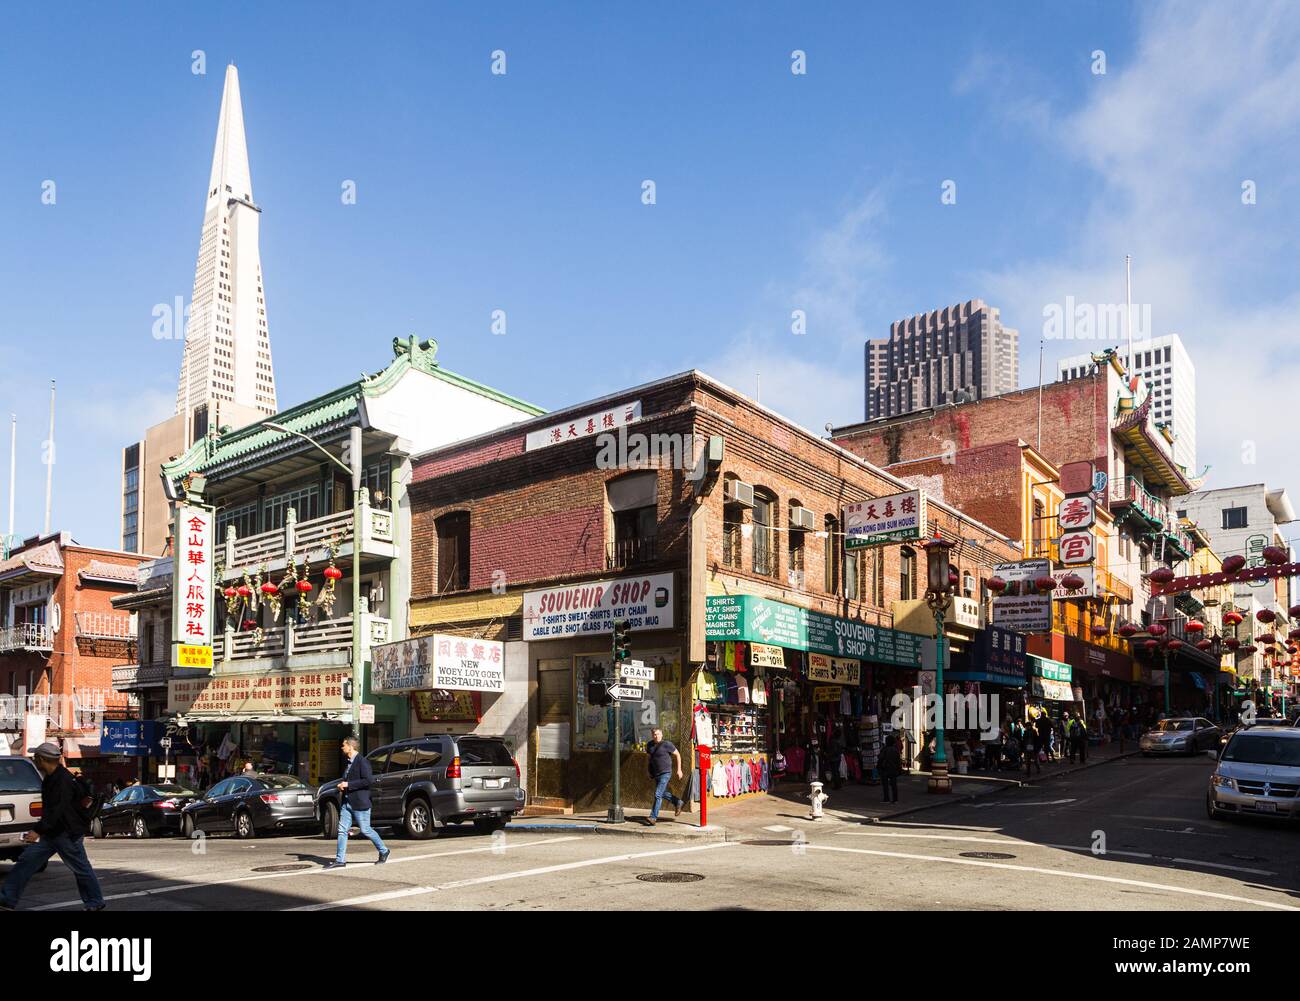 San Francisco - USA - June 4 2019: The famous Transamerica pyramid tower contrasts with low rise buildings in San Francisco Chinatown in the downtown Stock Photo